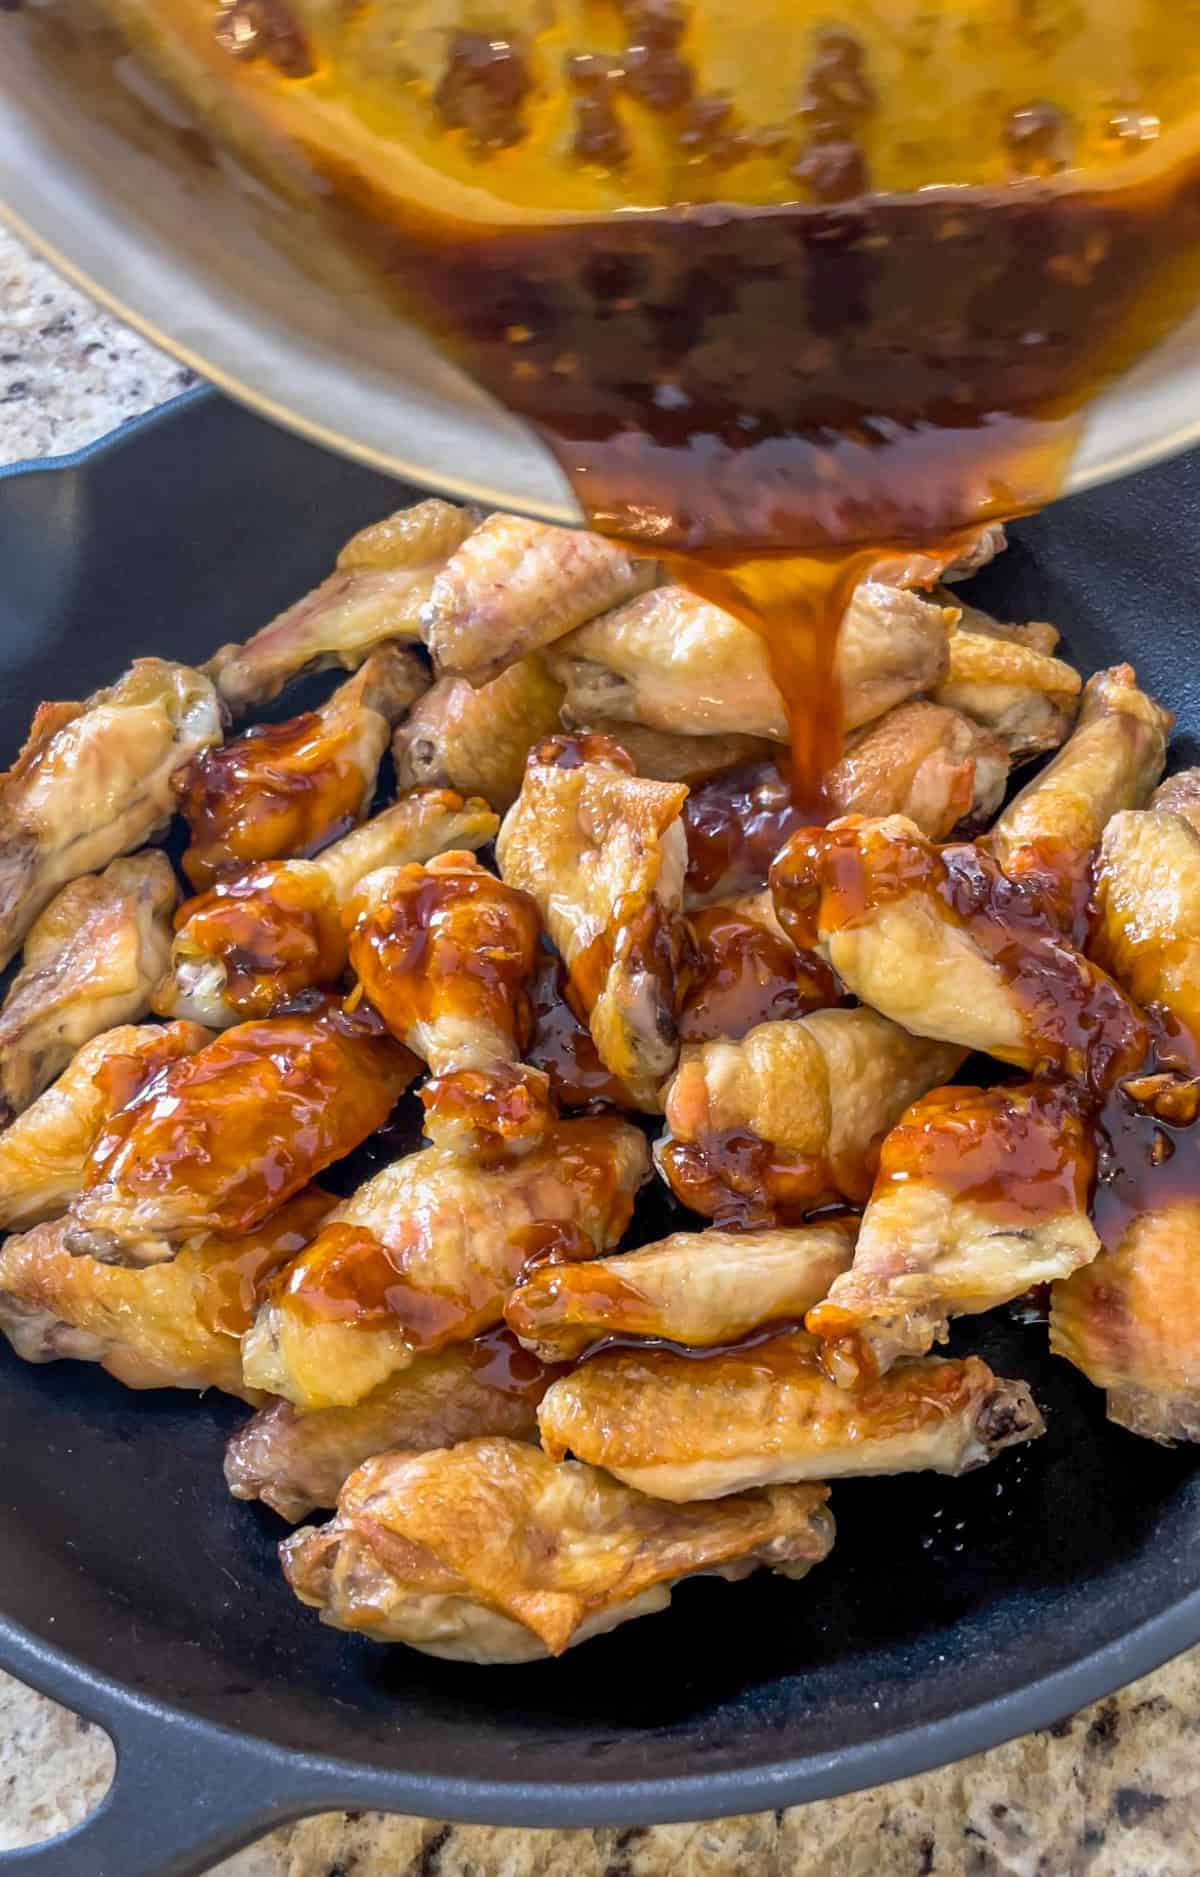 Honey sriracha sauce being poured onto wings.